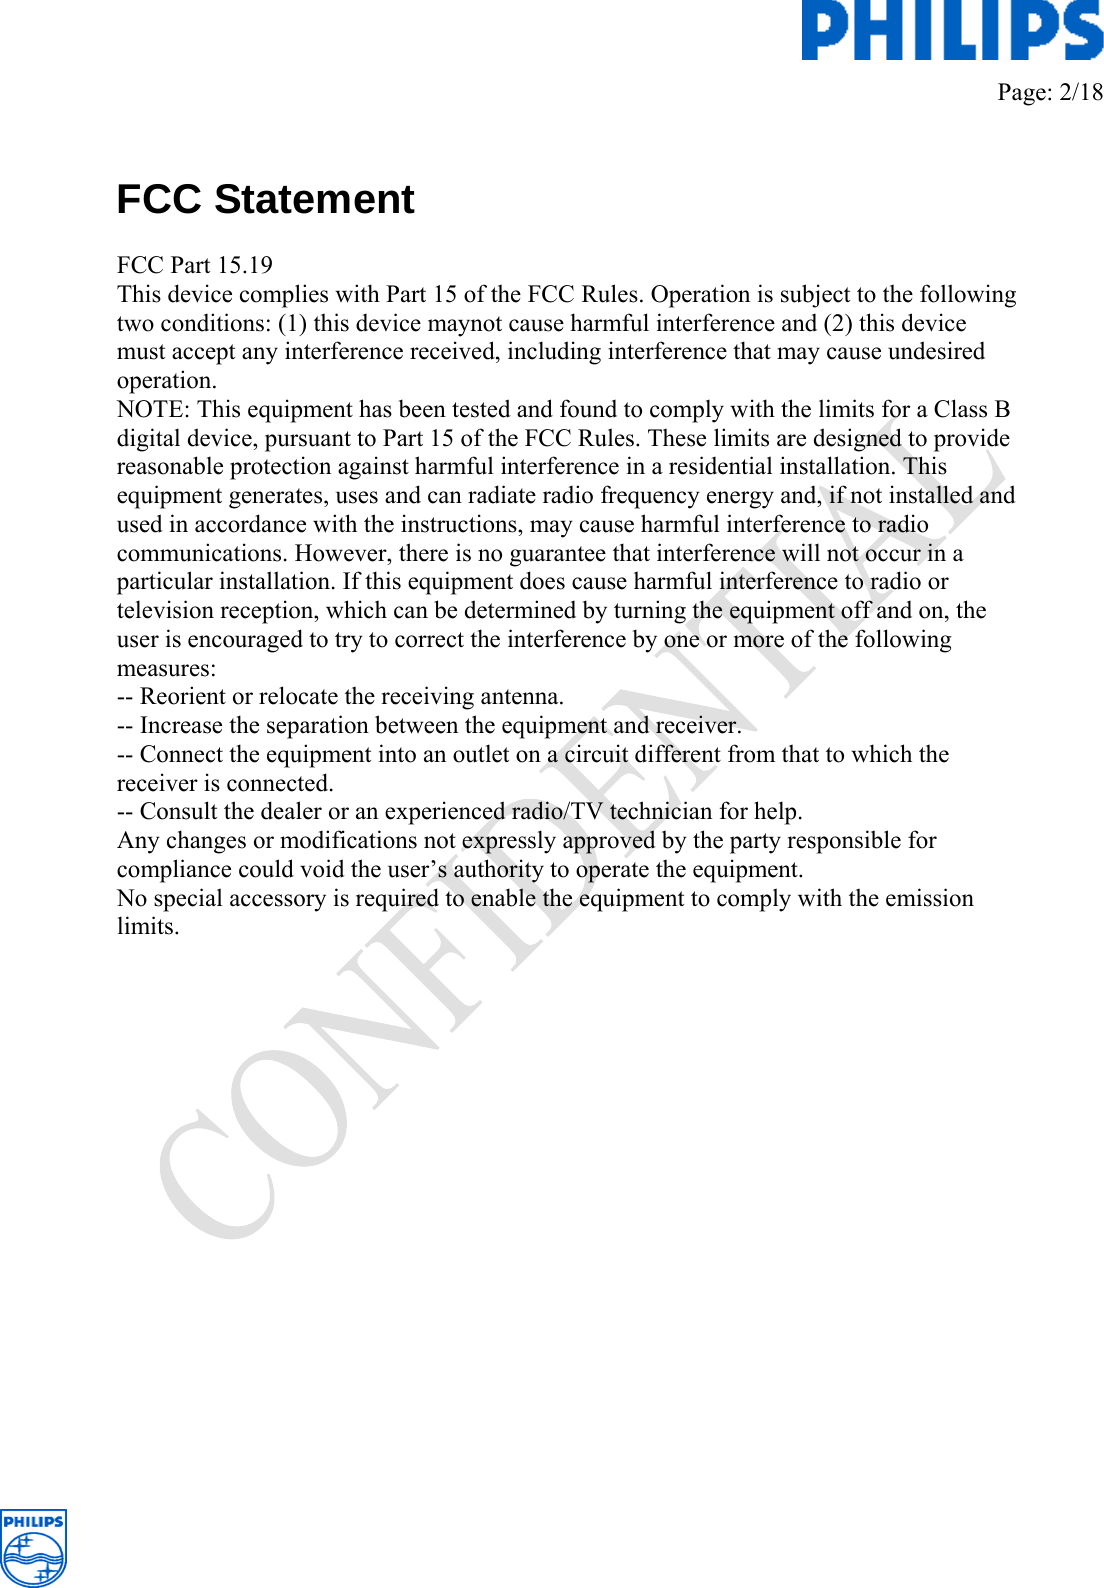         Page: 2/18    FCC Statement  FCC Part 15.19 This device complies with Part 15 of the FCC Rules. Operation is subject to the following two conditions: (1) this device maynot cause harmful interference and (2) this device must accept any interference received, including interference that may cause undesired operation. NOTE: This equipment has been tested and found to comply with the limits for a Class B digital device, pursuant to Part 15 of the FCC Rules. These limits are designed to provide reasonable protection against harmful interference in a residential installation. This equipment generates, uses and can radiate radio frequency energy and, if not installed and used in accordance with the instructions, may cause harmful interference to radio communications. However, there is no guarantee that interference will not occur in a particular installation. If this equipment does cause harmful interference to radio or television reception, which can be determined by turning the equipment off and on, the user is encouraged to try to correct the interference by one or more of the following measures: -- Reorient or relocate the receiving antenna. -- Increase the separation between the equipment and receiver. -- Connect the equipment into an outlet on a circuit different from that to which the receiver is connected. -- Consult the dealer or an experienced radio/TV technician for help. Any changes or modifications not expressly approved by the party responsible for compliance could void the user’s authority to operate the equipment. No special accessory is required to enable the equipment to comply with the emission limits.